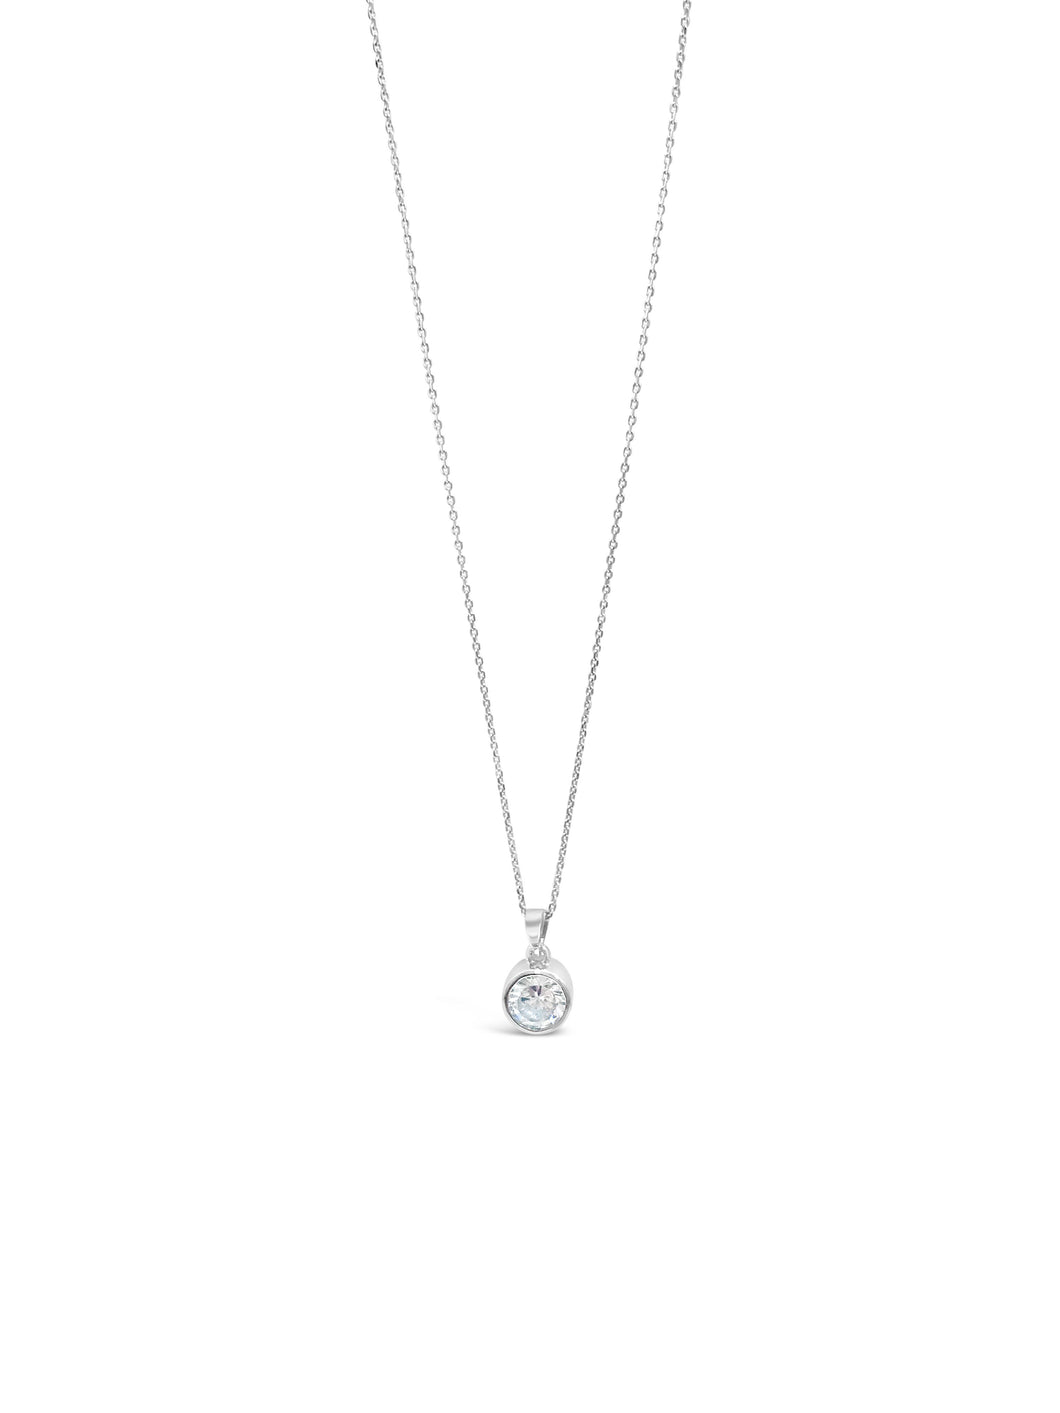 Absolute Jewellery Diamante Stud Necklace HCP203